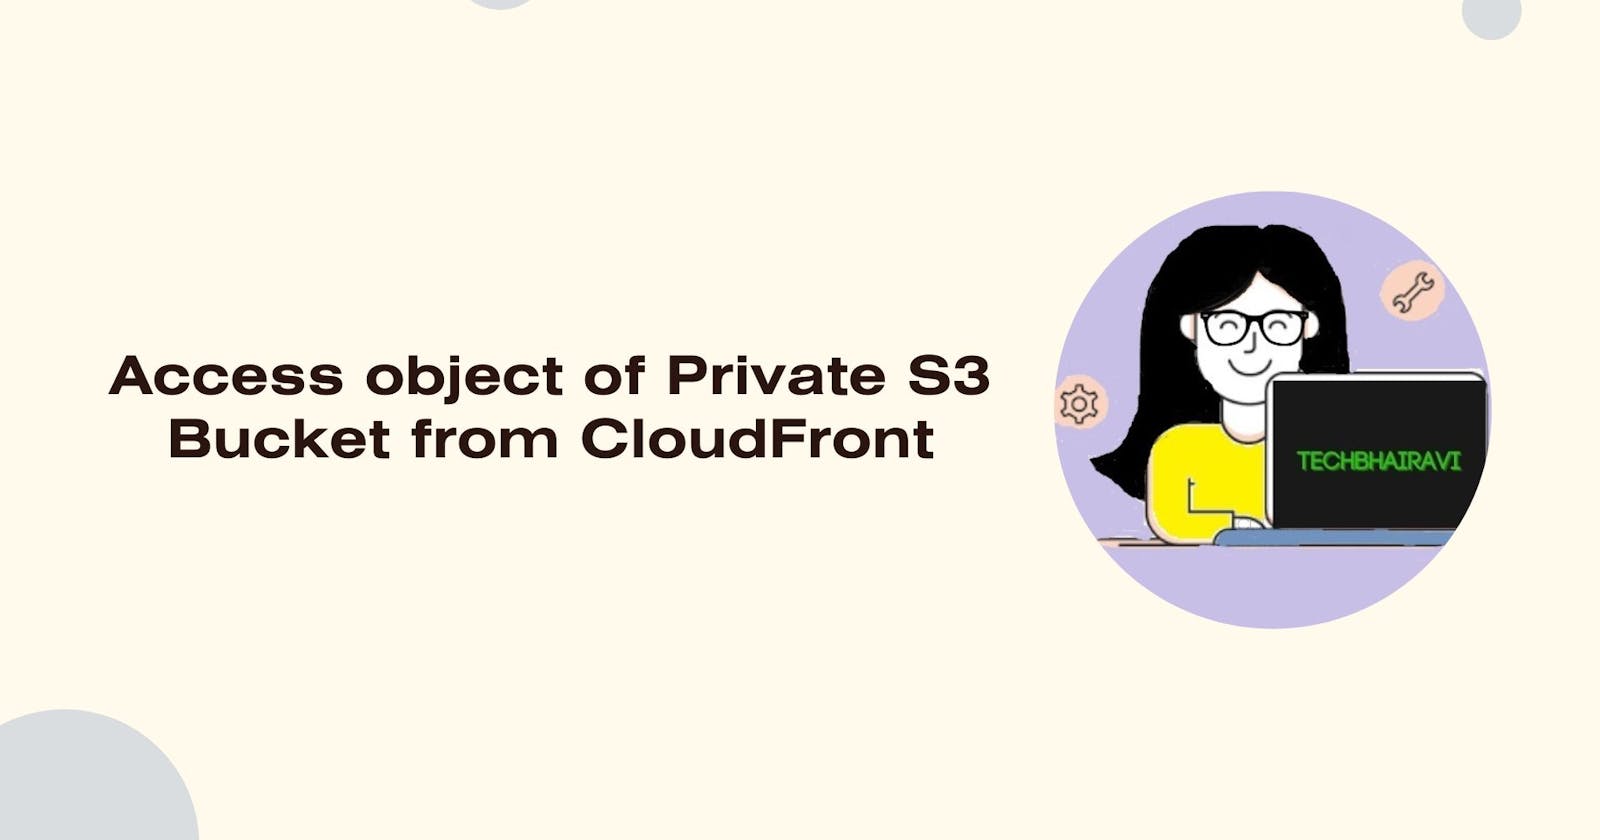 Access object of Private S3 Bucket from CloudFront